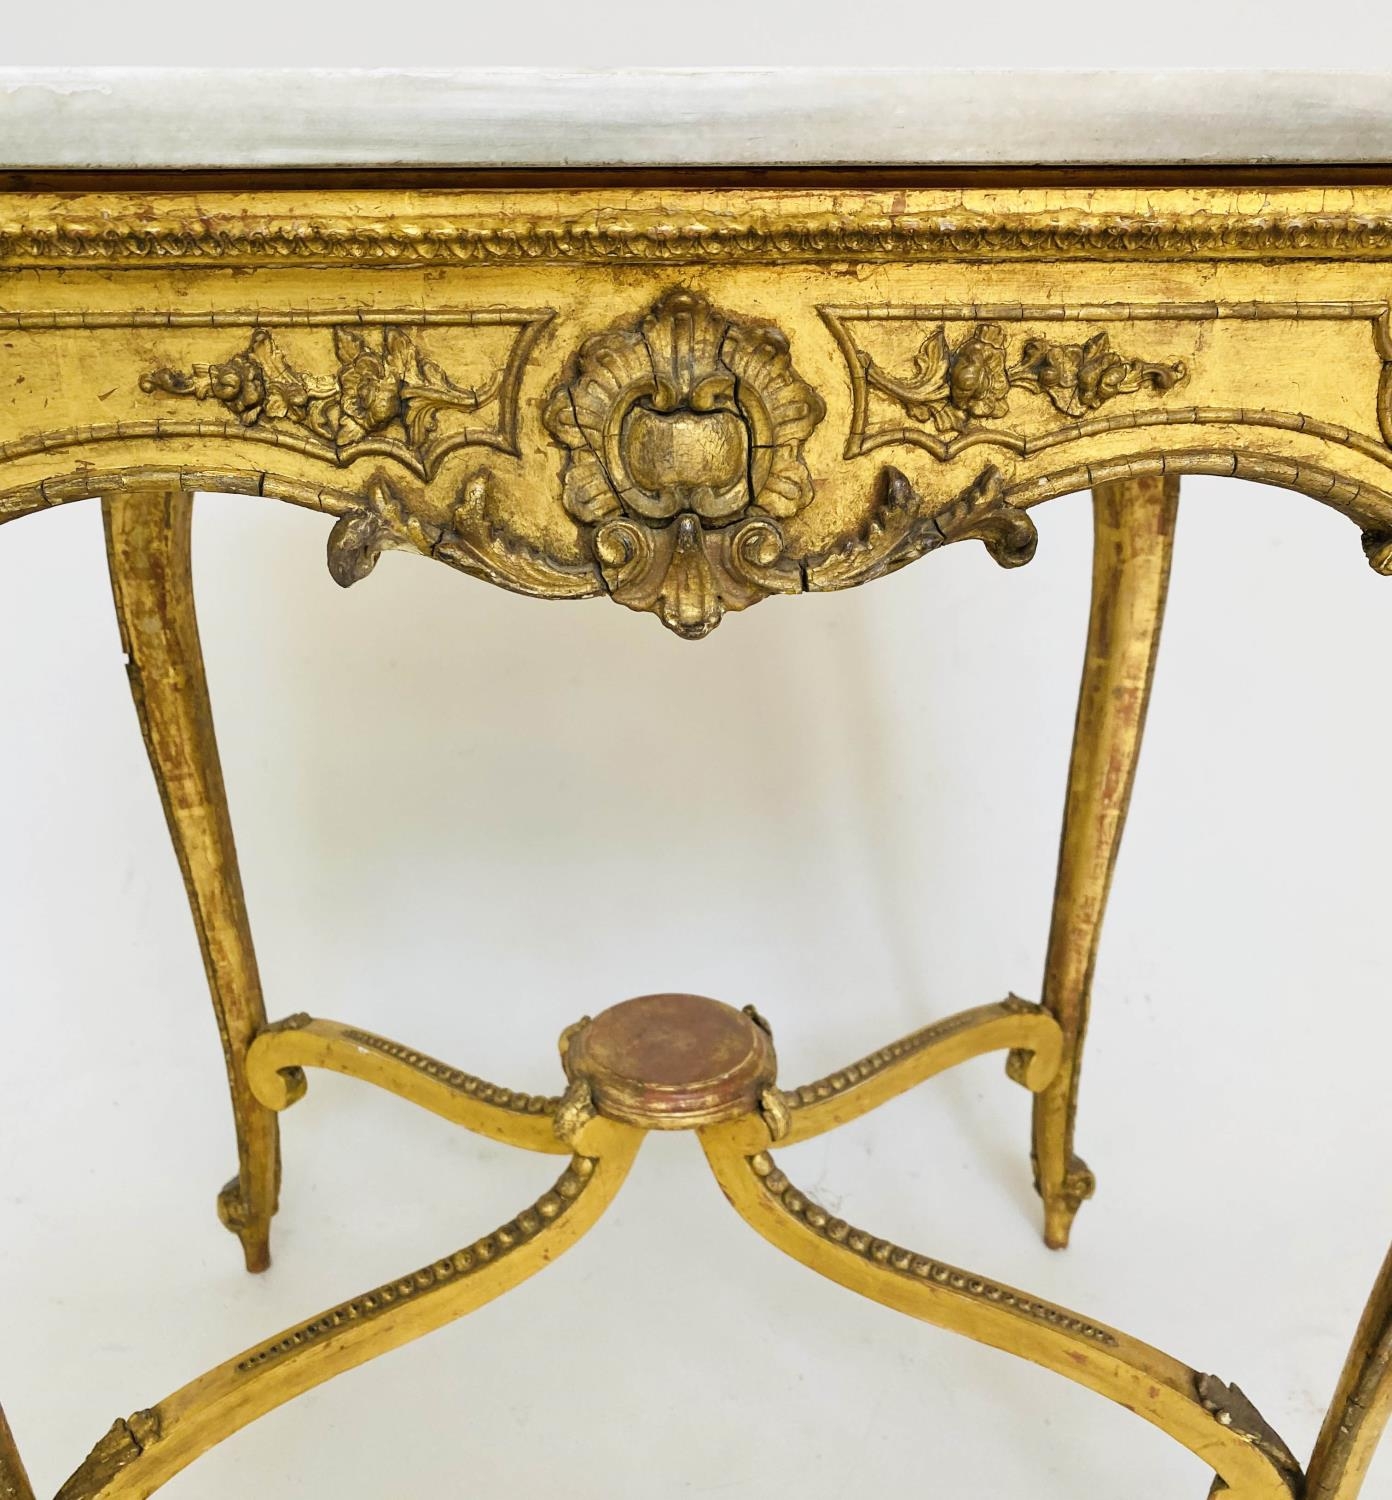 CENTRE TABLE, 19th century Italian giltwood and gesso with shell and C scroll decoration, marble top - Image 10 of 11